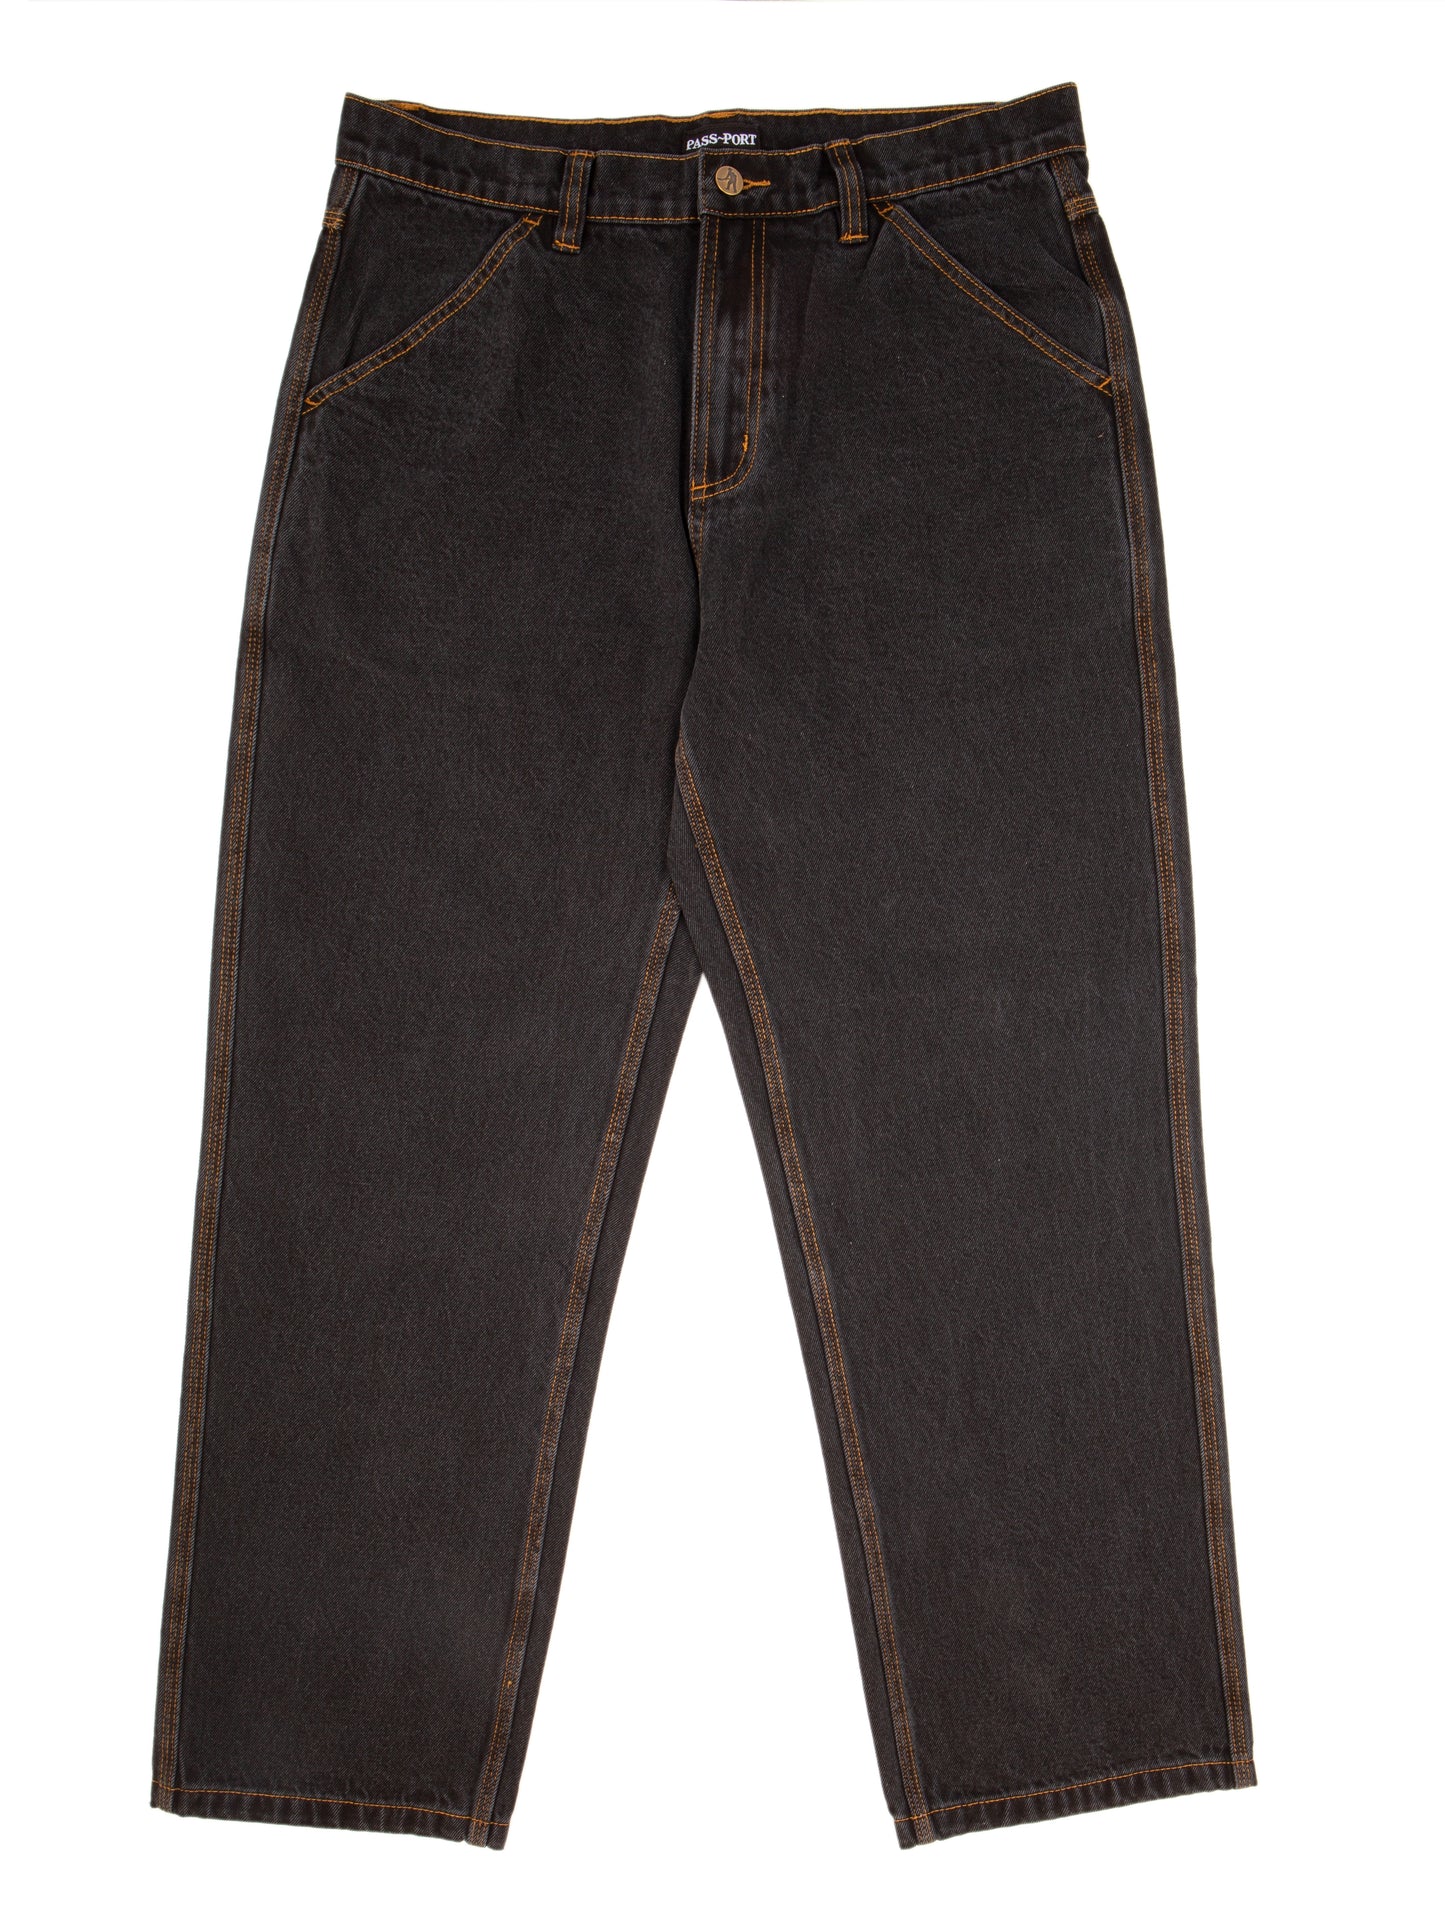 PASSPORT Workers Club Jean - Washed Black